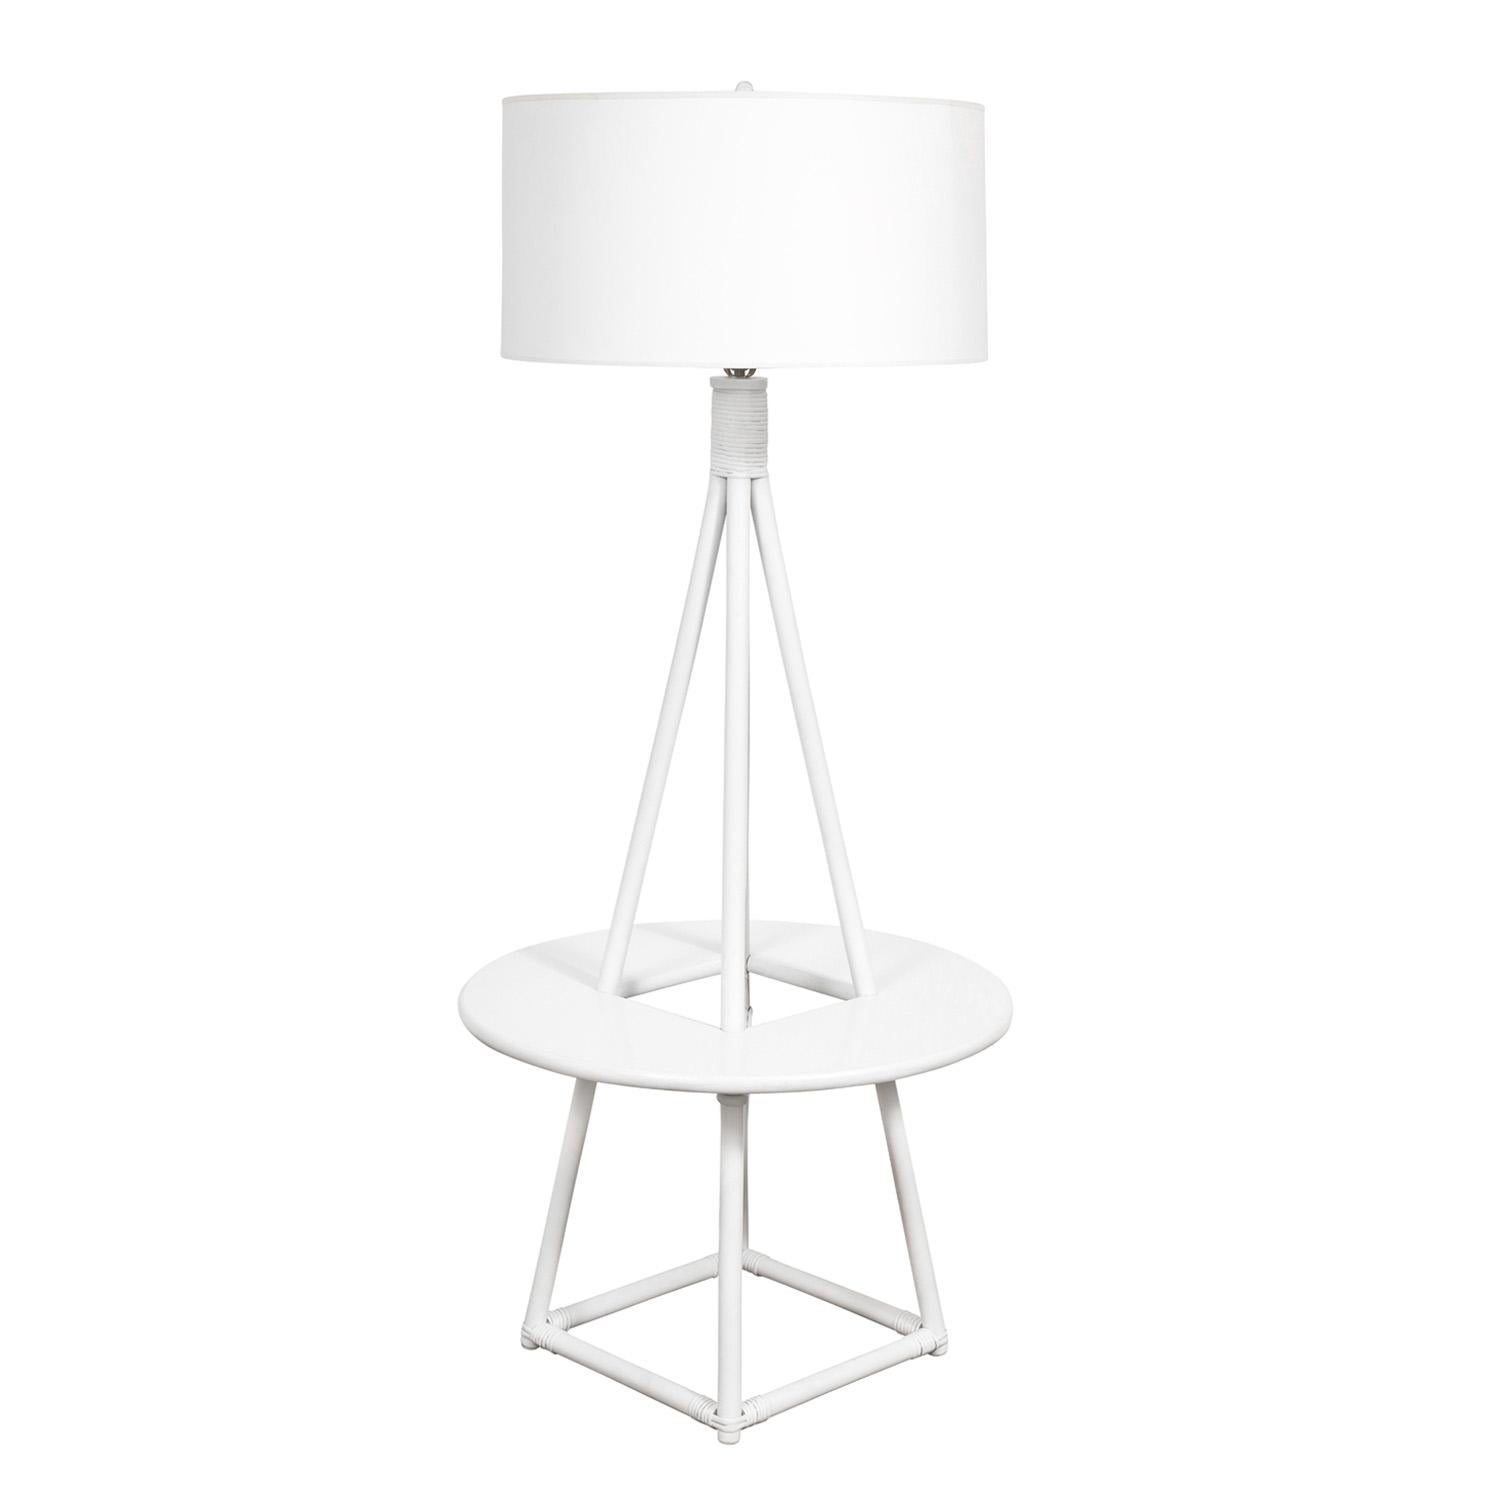 Elegant white lacquered floor lamp with incorporated white laminate table by Tommi Parzinger for Willow and Reed, American 1950’s. Willow and Reed designed furniture ideal for enclosed porches or outdoor areas not exposed to the elements. This